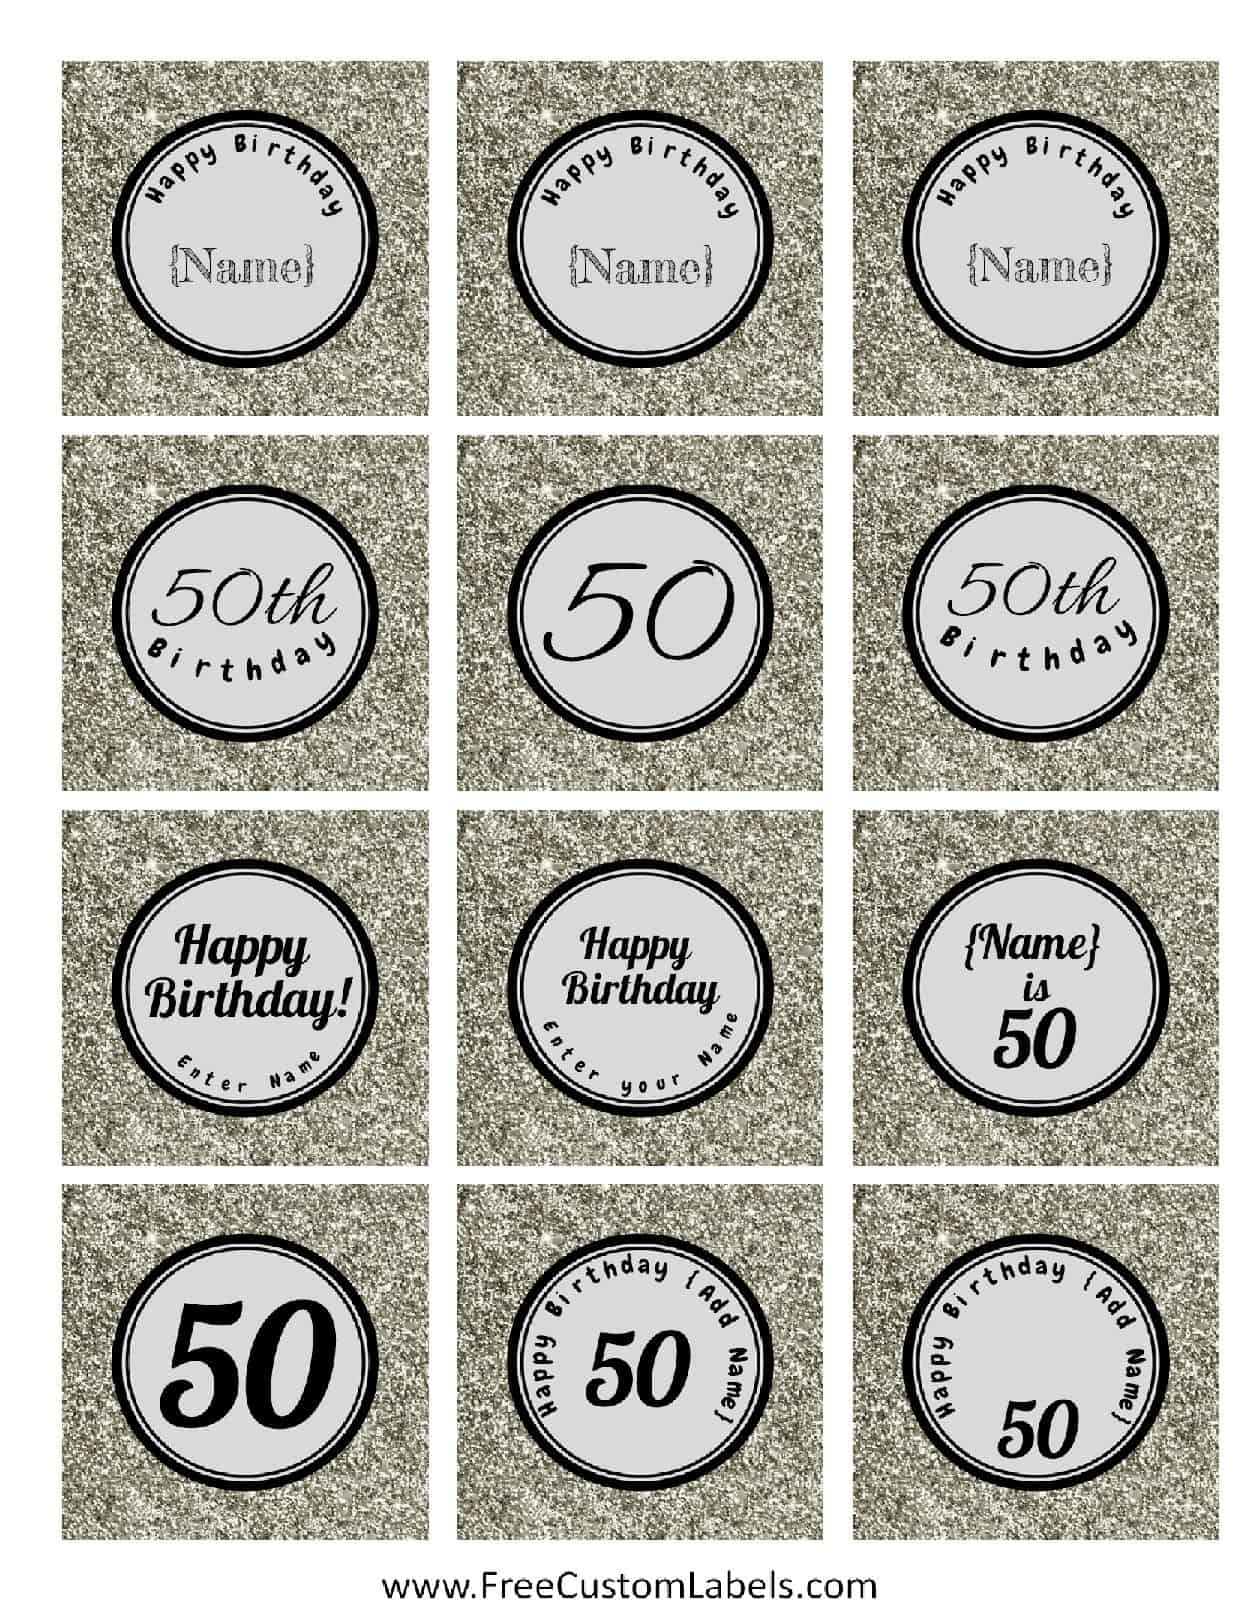 50th Birthday Cupcake Toppers Free And Customizable